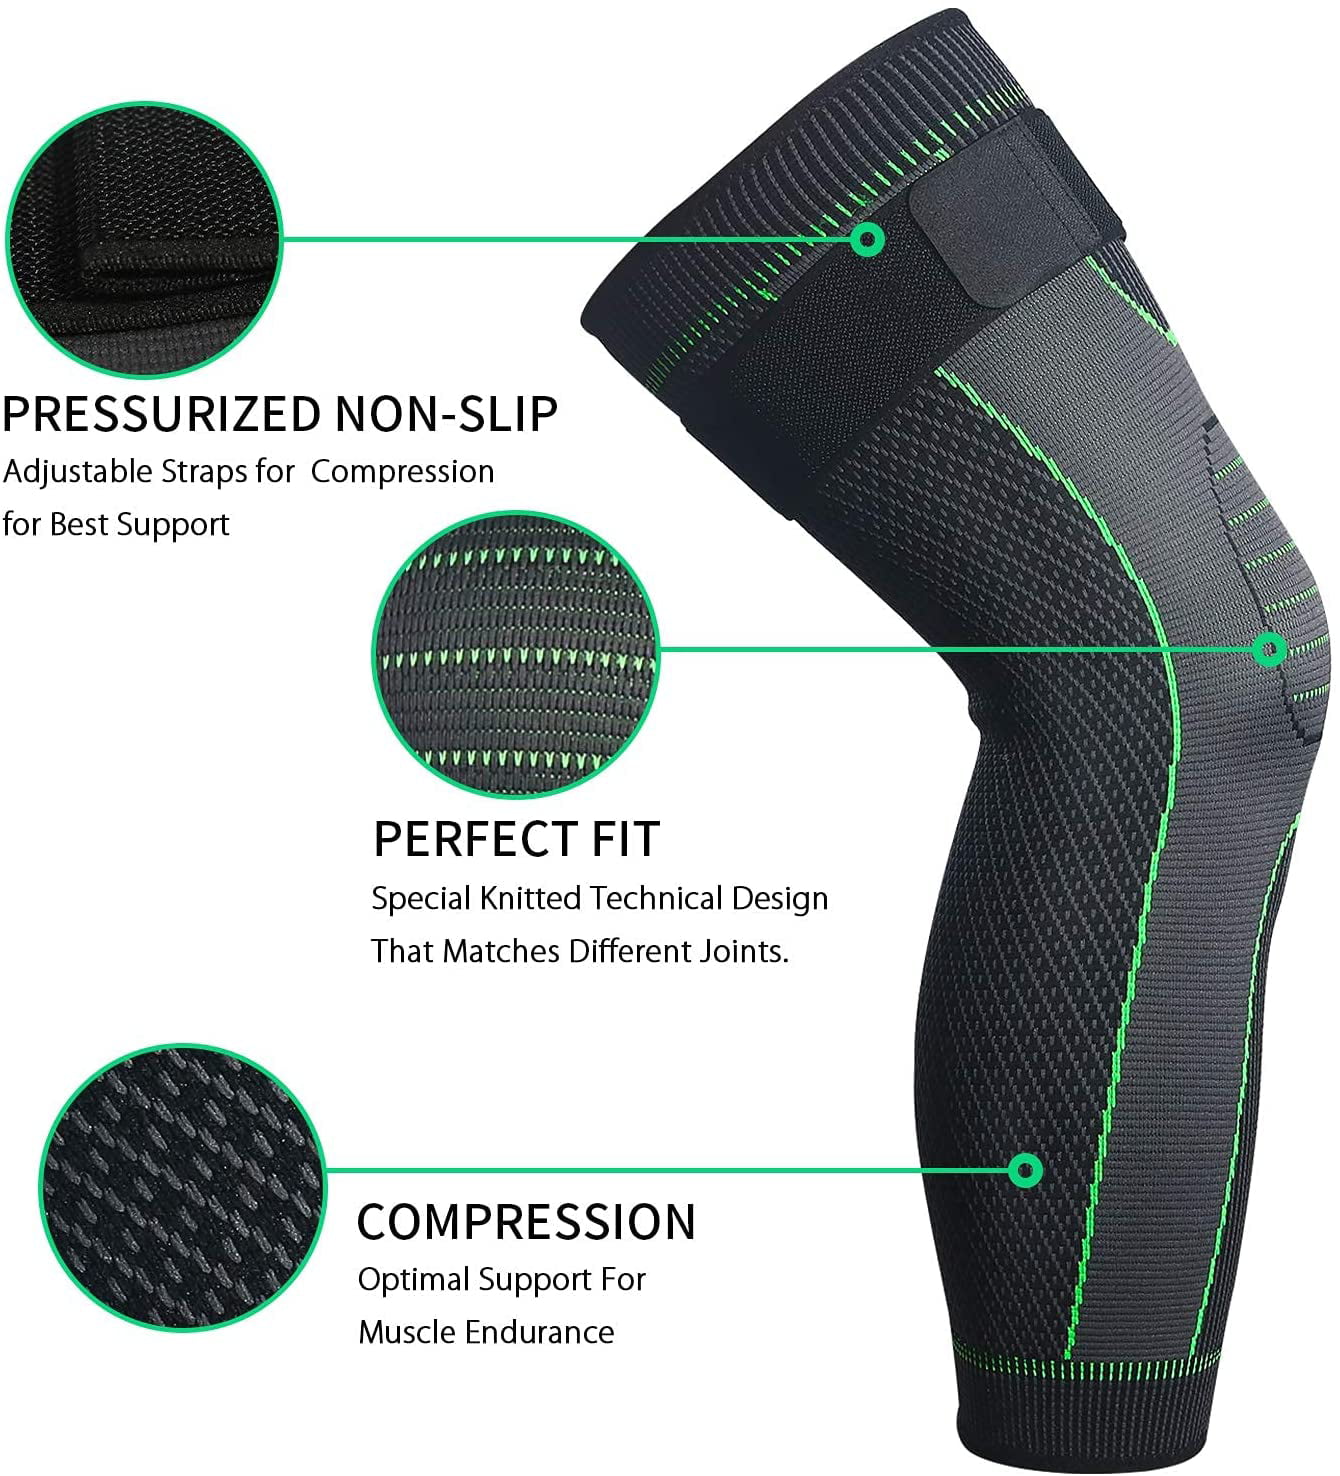 Full Leg Sleeves Long Compression Leg Sleeve Knee Sleeves Protect Leg, for Man  Women Basketball, Arthritis Cycling Sport Football, Reduce Varicose Veins  and Swelling of Legs(Pair) 